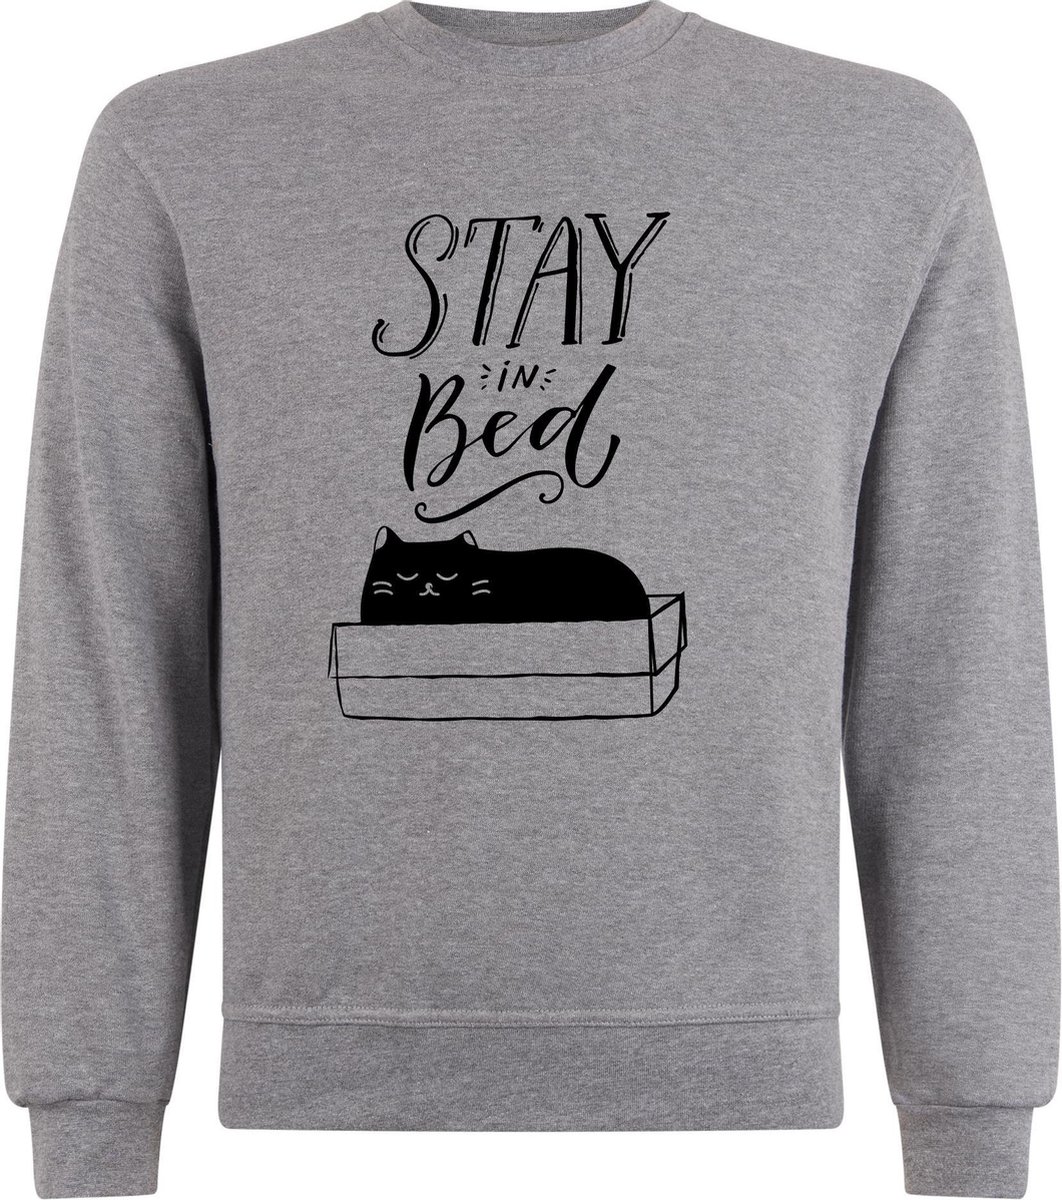 Sweater zonder capuchon - Jumper - Trui - Vest - Lifestyle sweater - Chill Sweater - Kat - Cat - Stay In Bed - S.Grey - XL